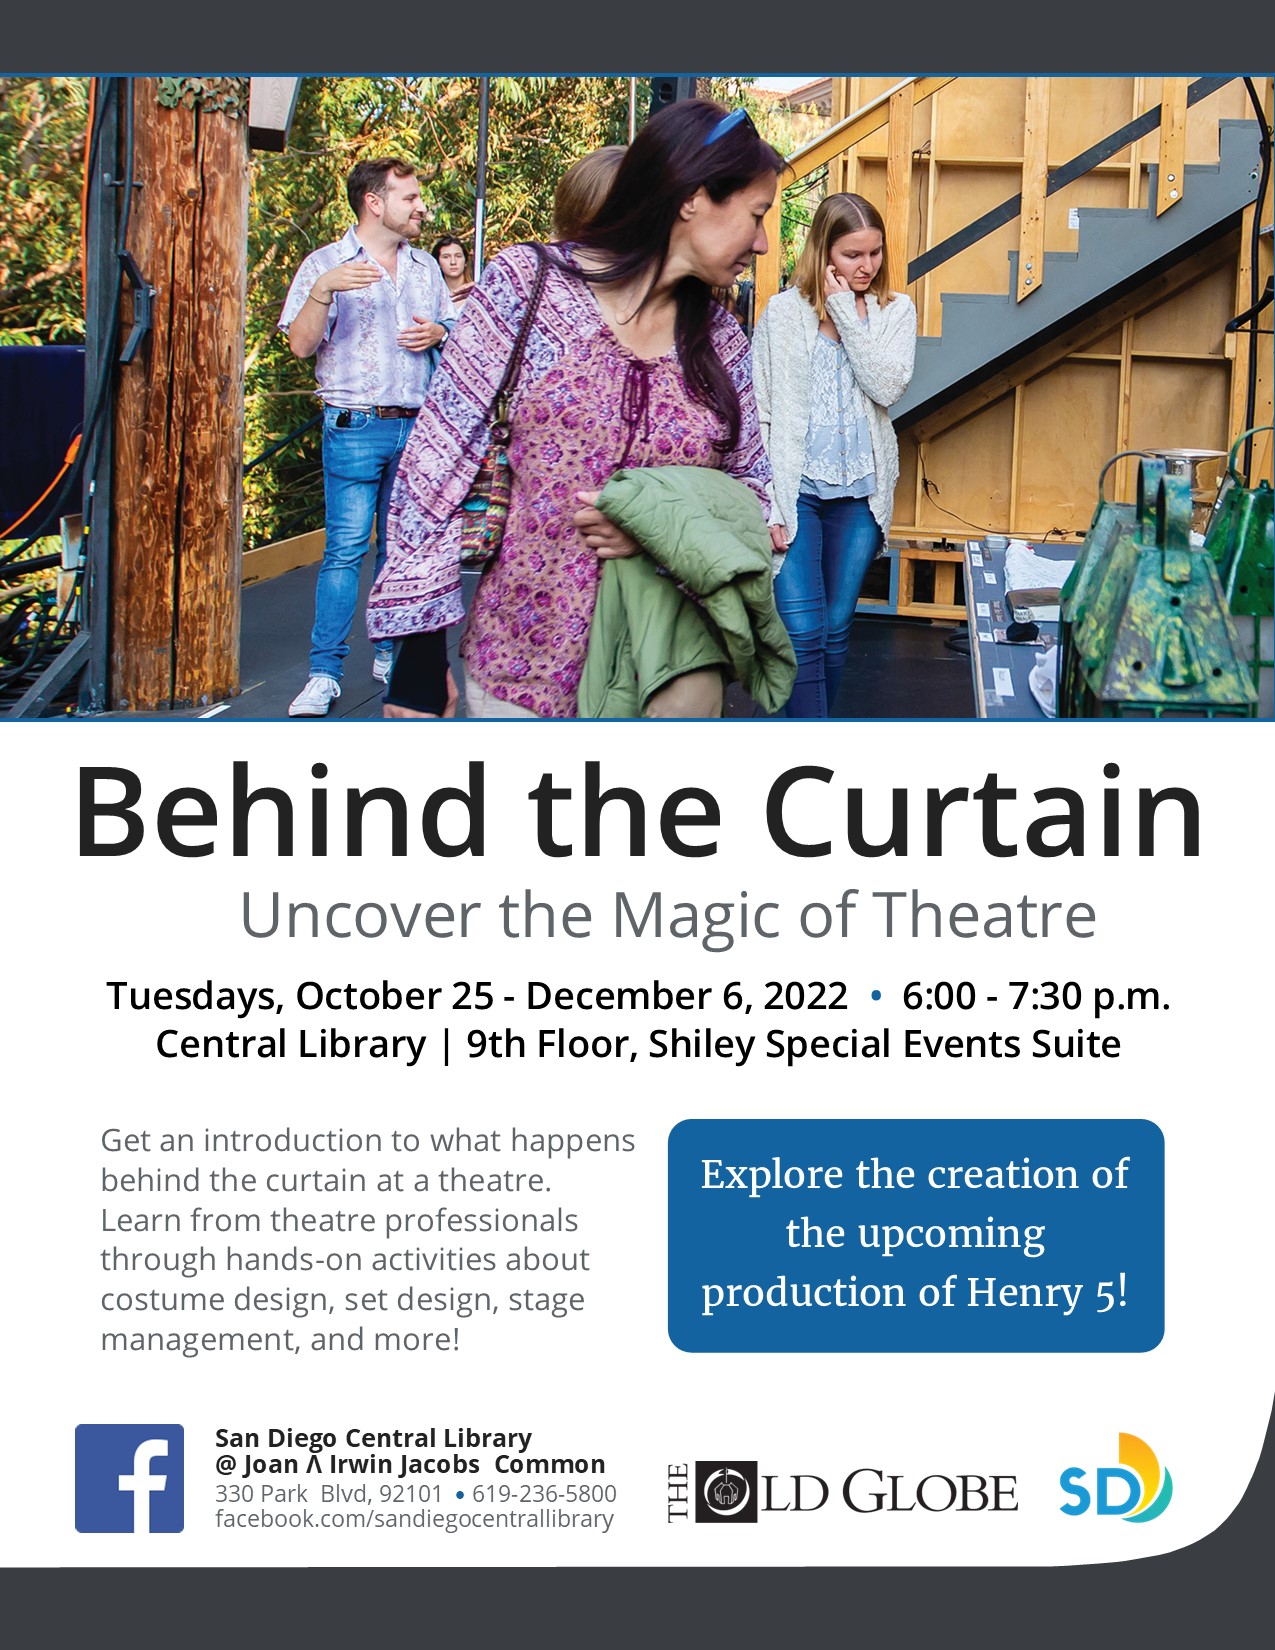 Flyer for Behind the Curtain program